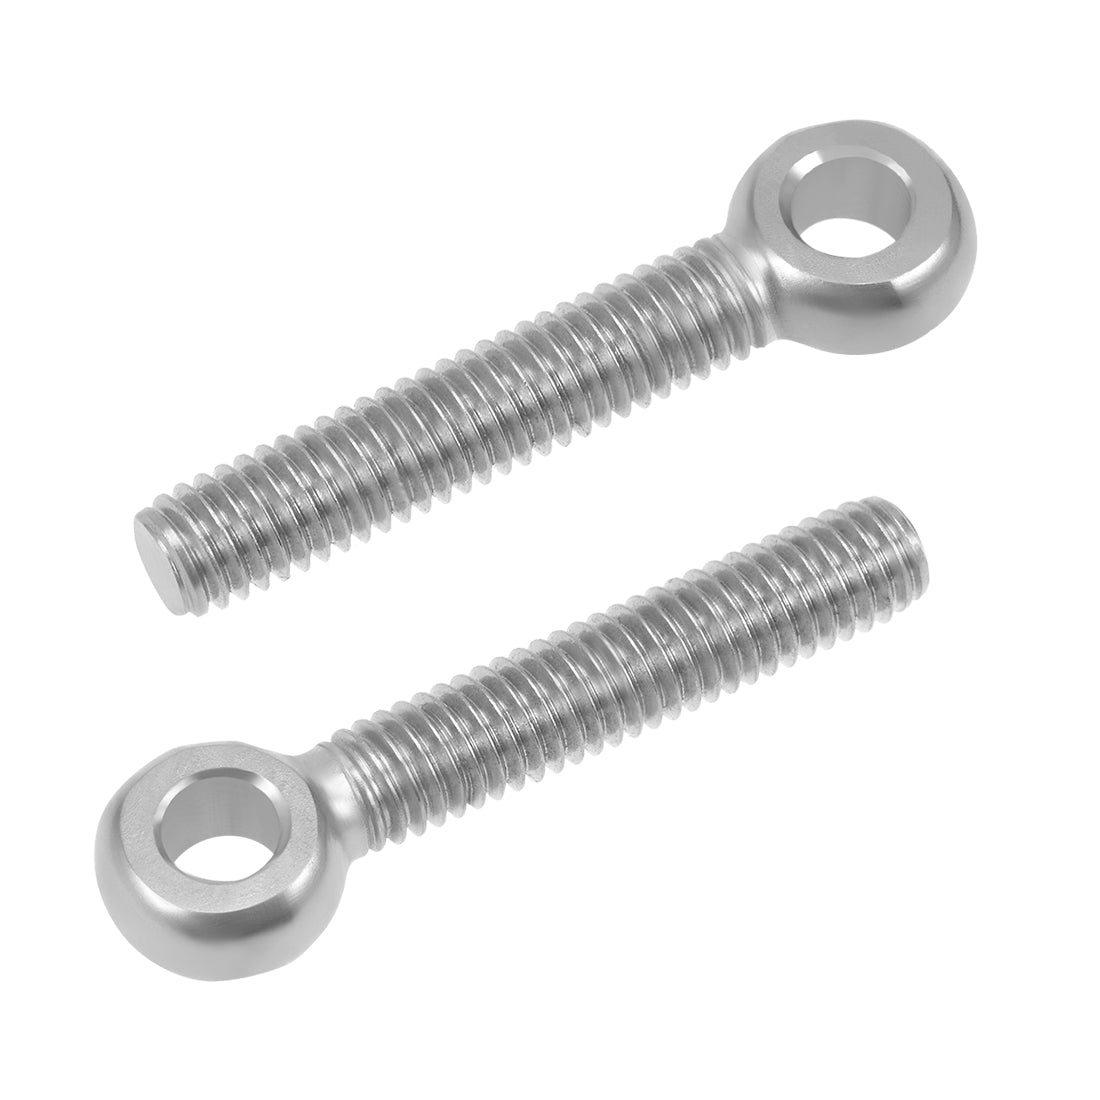 uxcell Uxcell M6 x 35mm Machinery Shoulder Swing Lifting Eye Bolt 304 Stainless Steel Metric Thread 4pcs